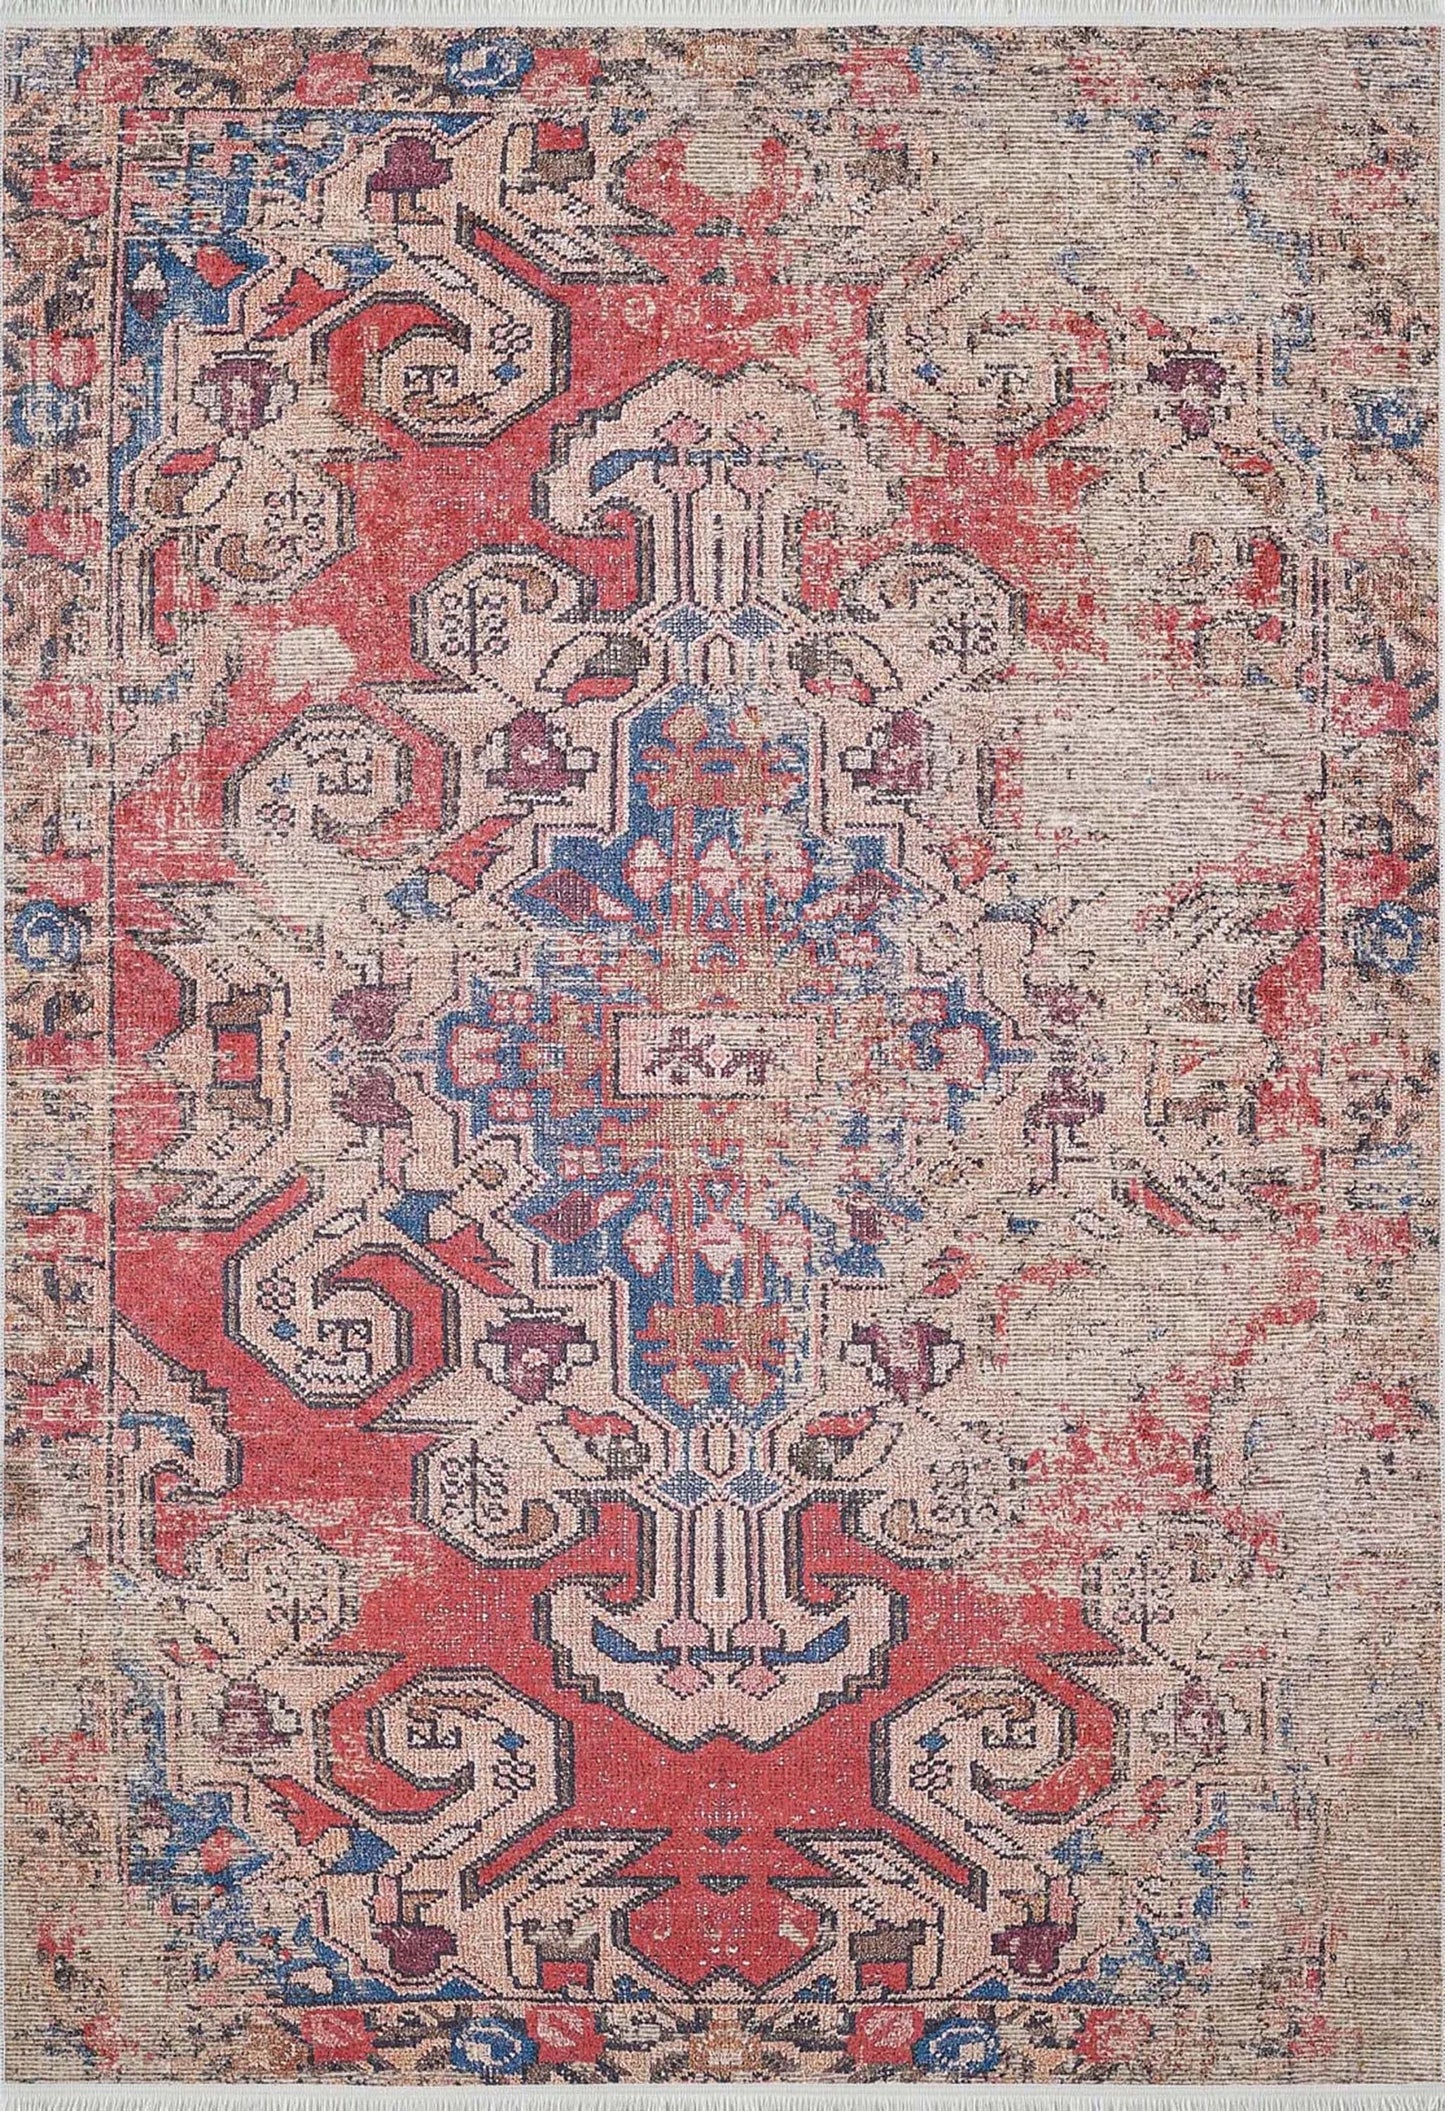 2x3 Distressed Turkish Rug, Faded Red Rug, Small Area Rug 3x5 4x6, Vintage design Rugs for Kitchen Bathroom Bedside Bedroom Entryway Laundry